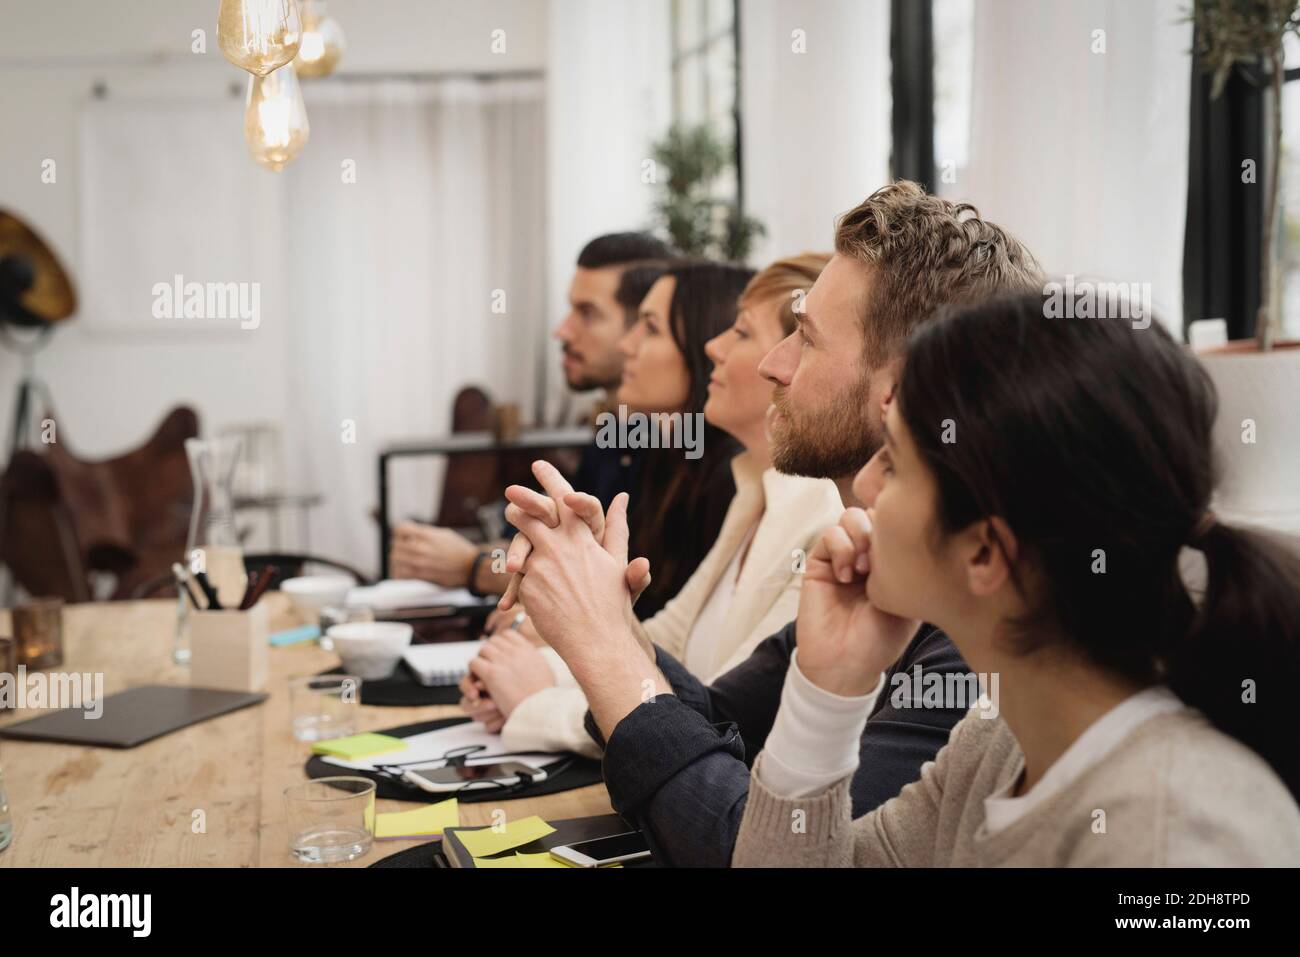 Business people during interview at table in office Stock Photo